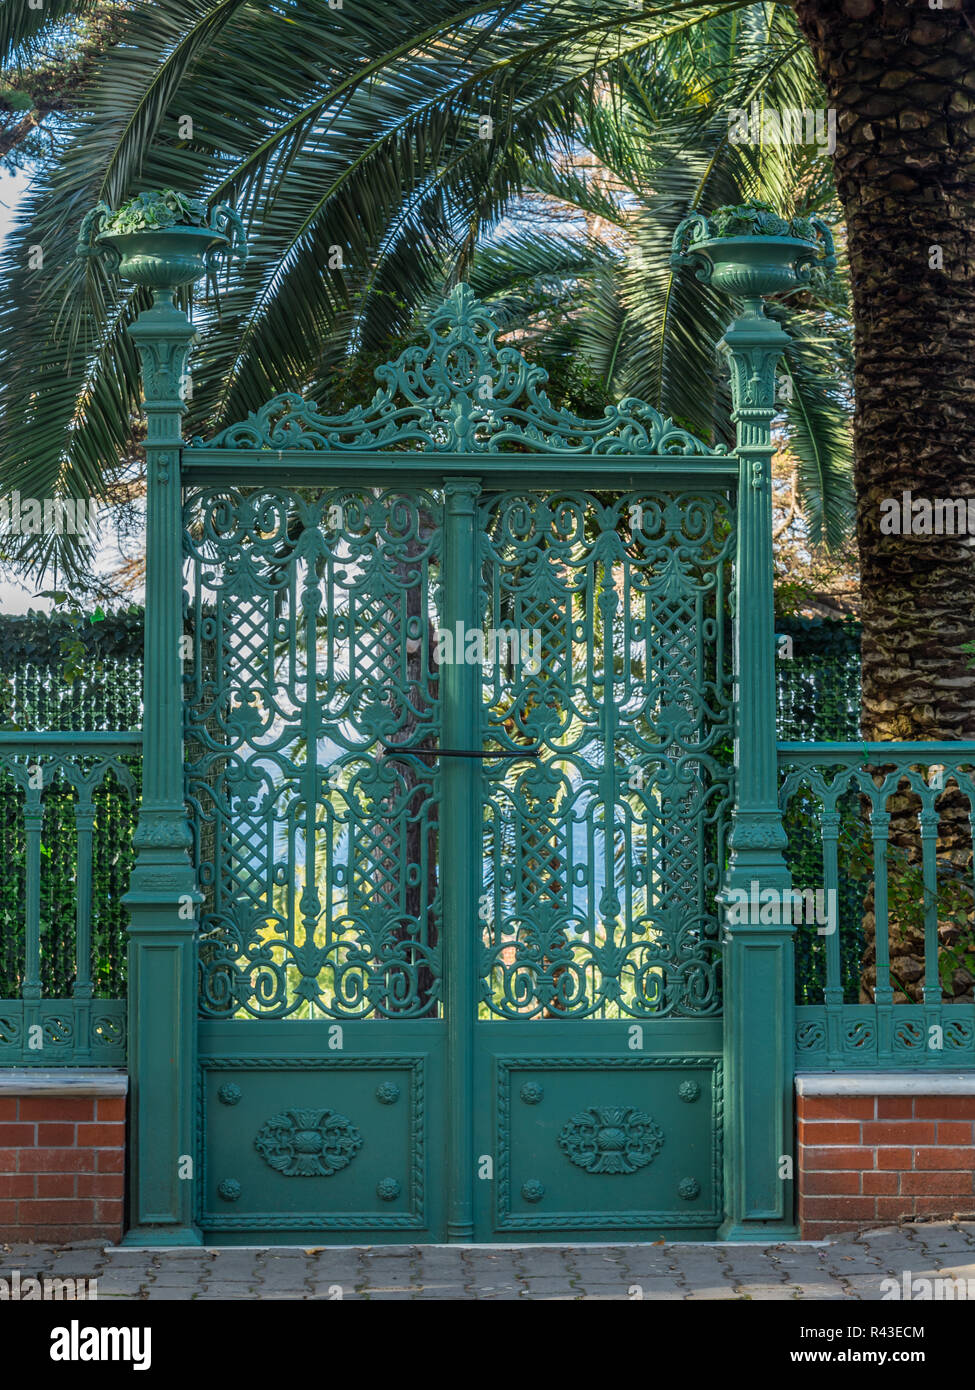 Istanbul, Turkey, October 22, 2013: Ornate wrought iron gate at the entrance to a villa on Buyukada, one of the Princes Islands. Stock Photo